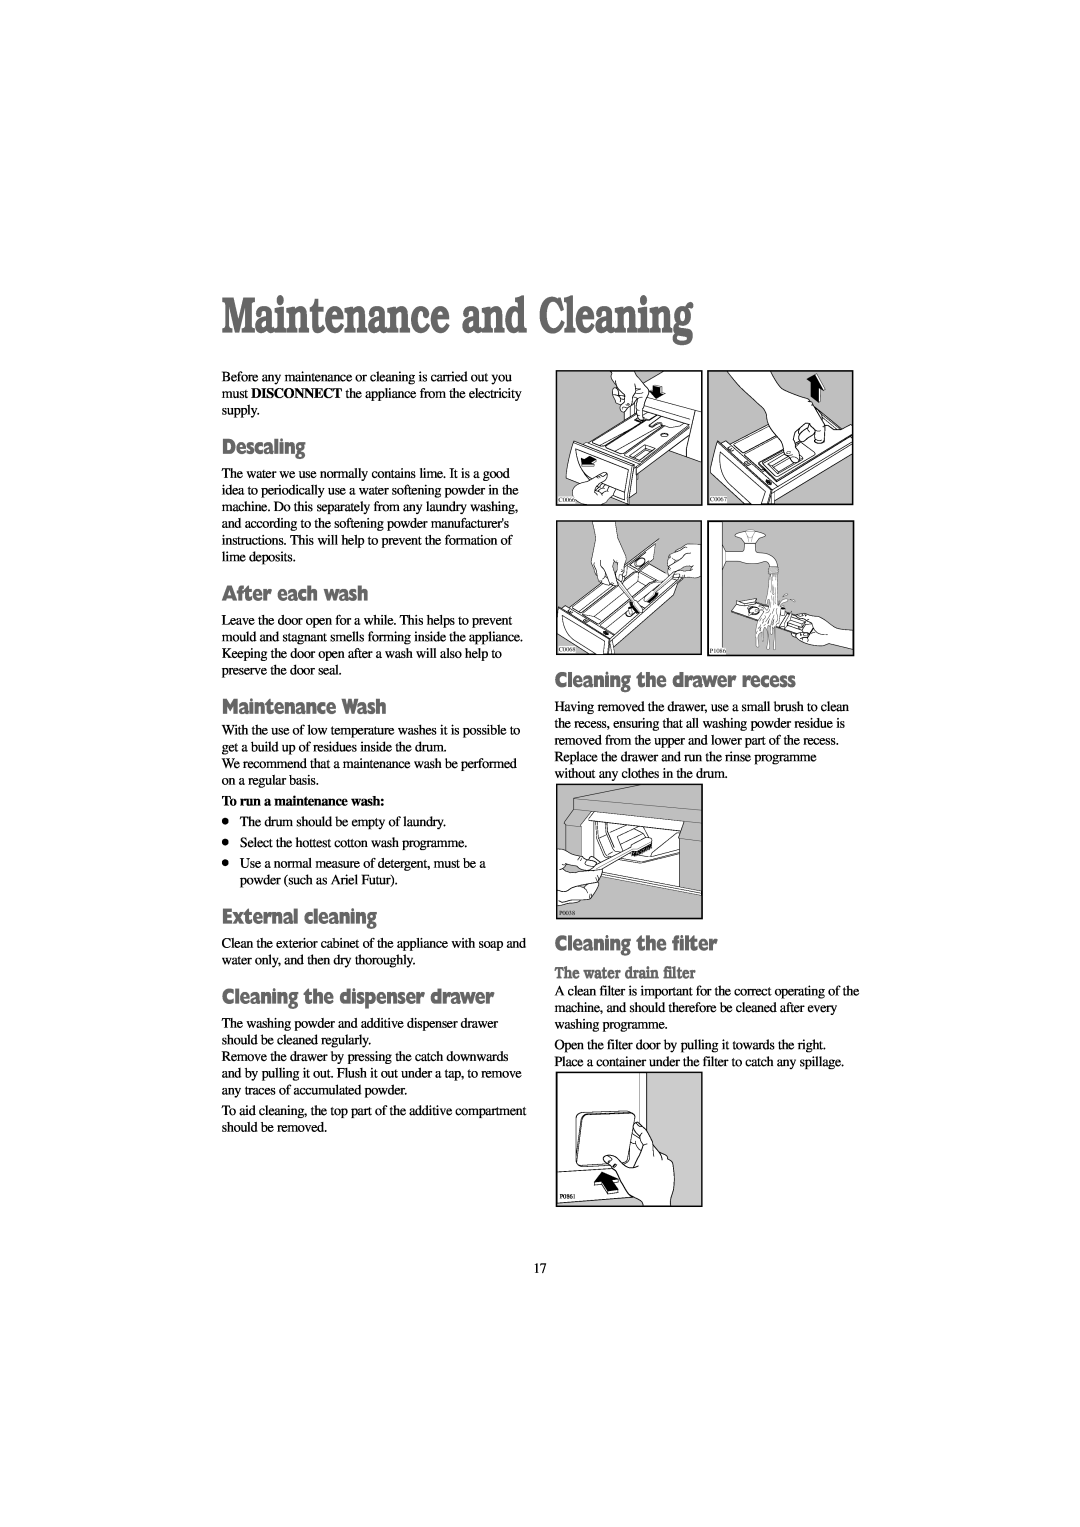 Electrolux FJD 1266 W manual Maintenance and Cleaning, Descaling, After each wash, Maintenance Wash, External cleaning 